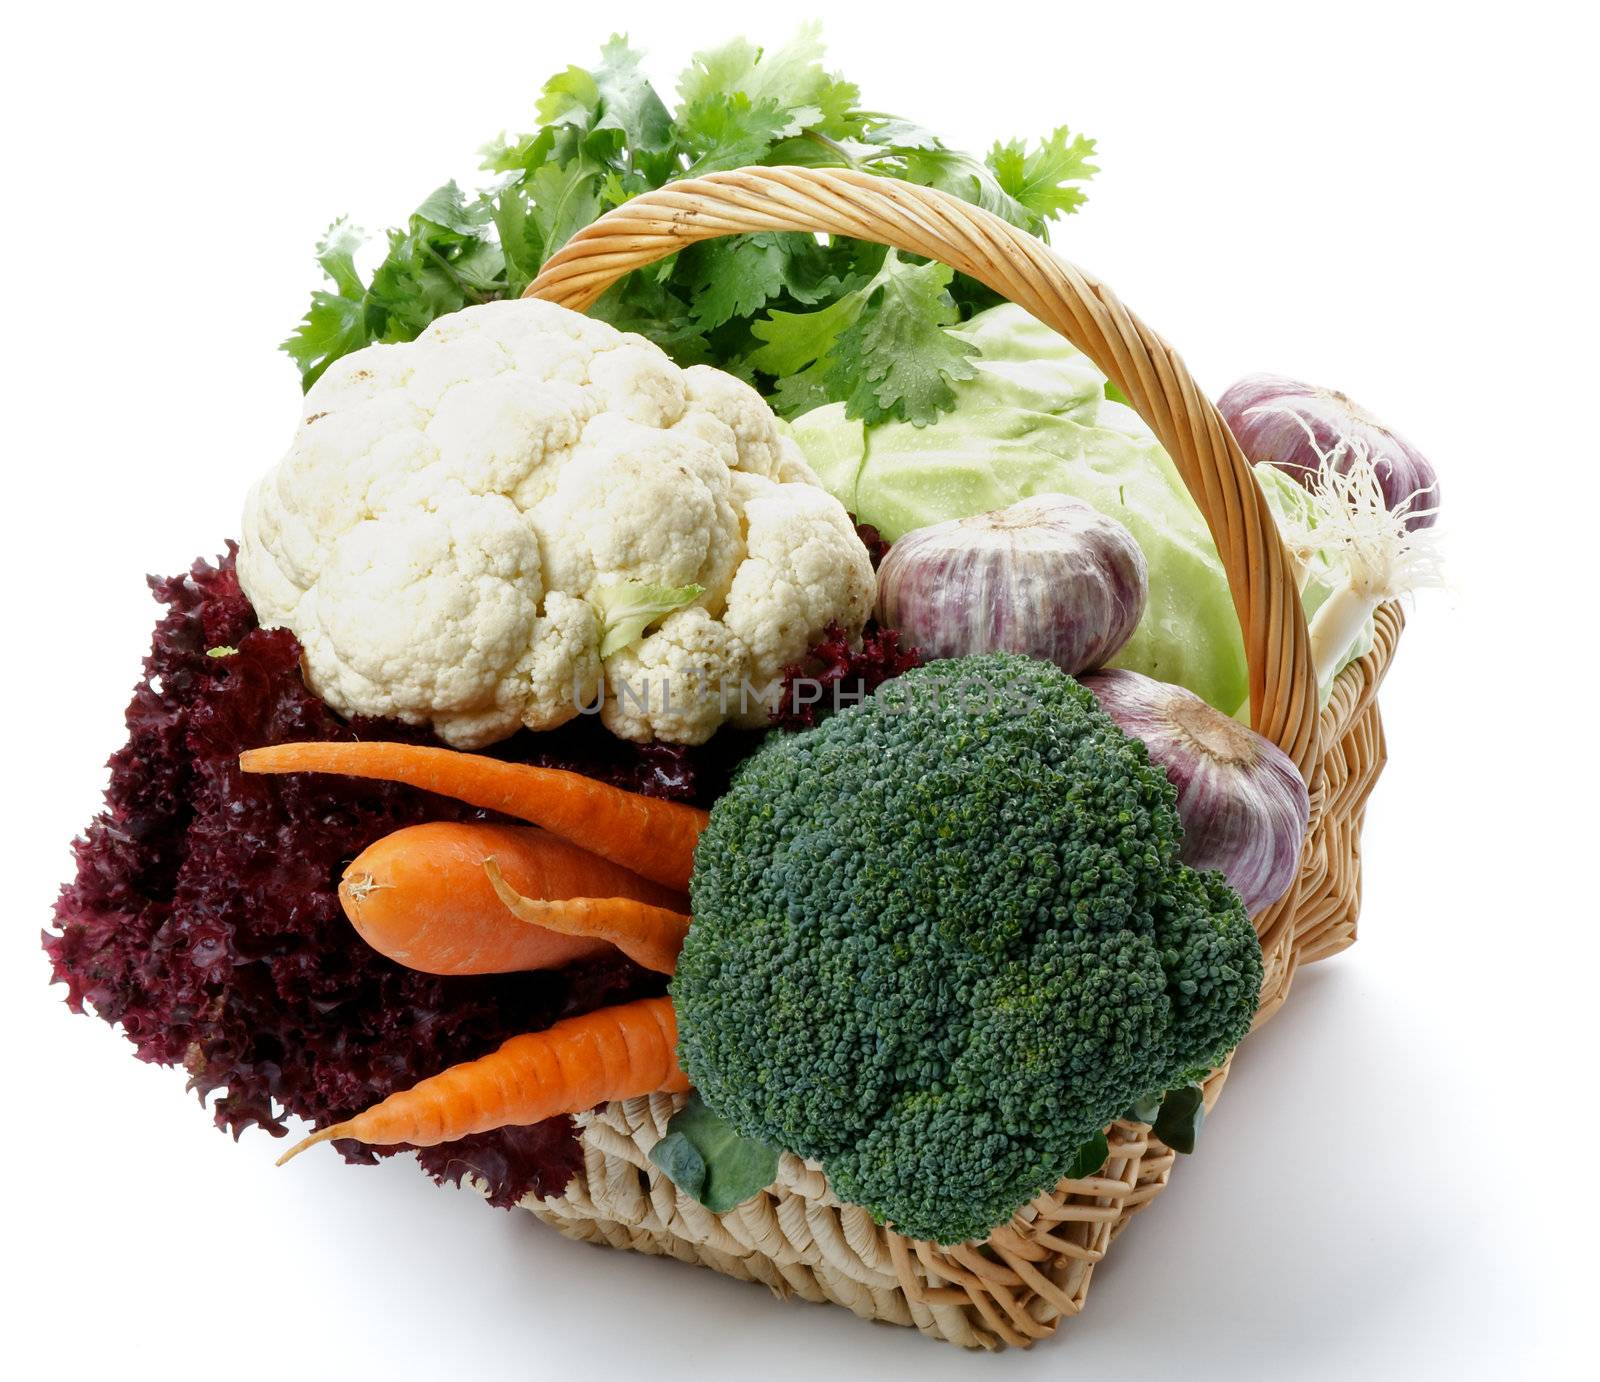 Basket of Cabbage, Broccoli and Cauliflower with Raw Vegetables isolated on white background